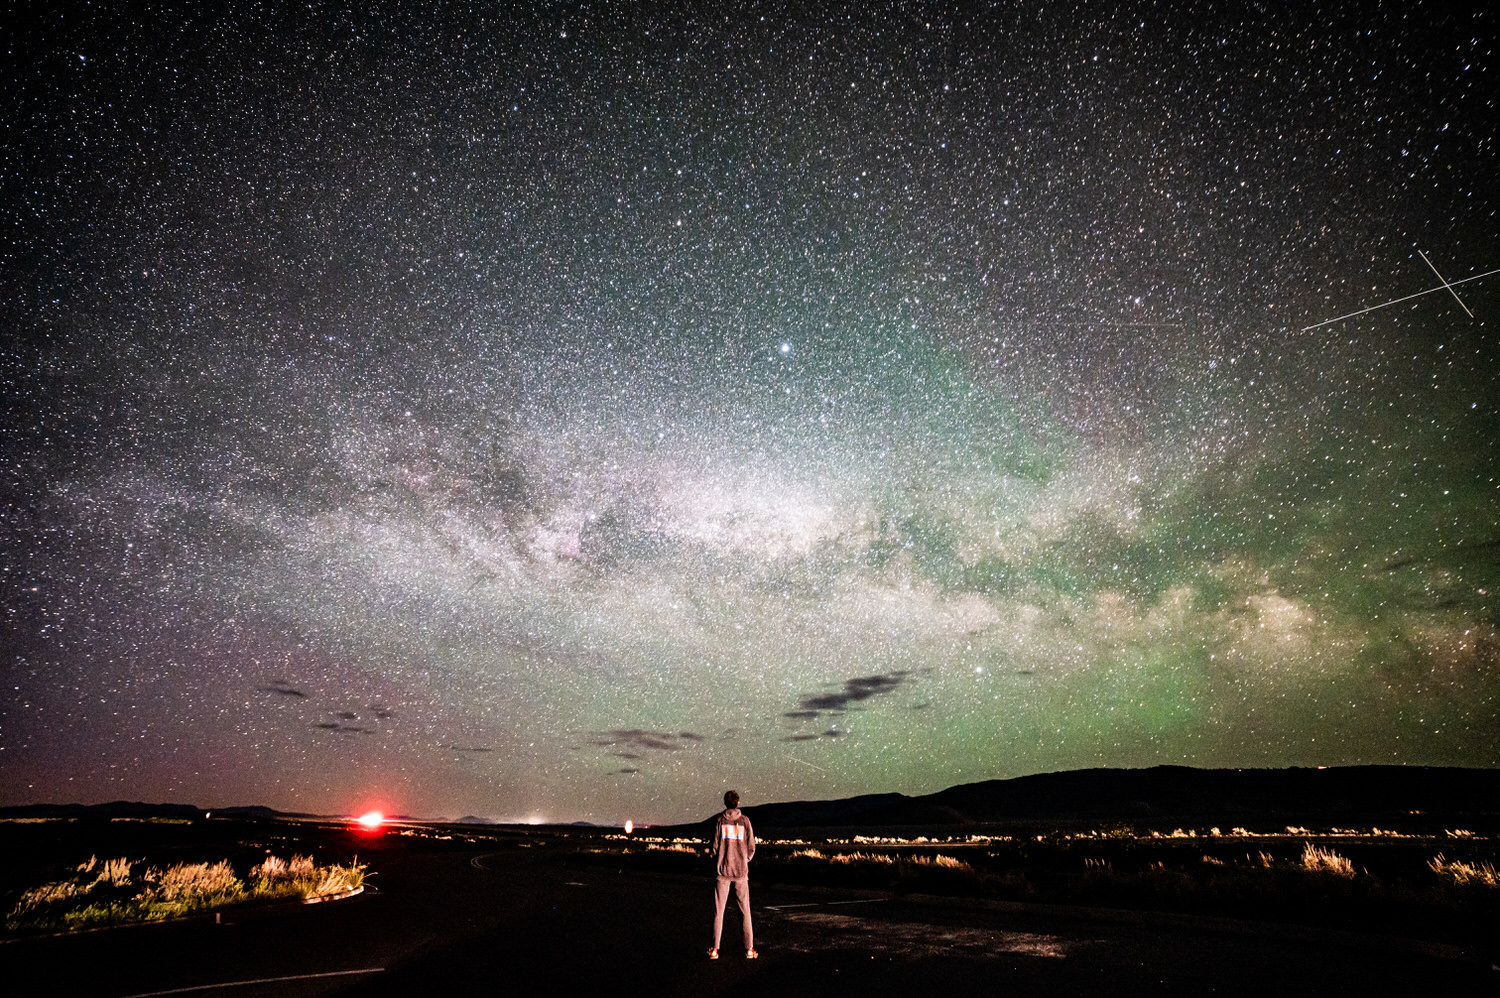 Man and the Milky Way